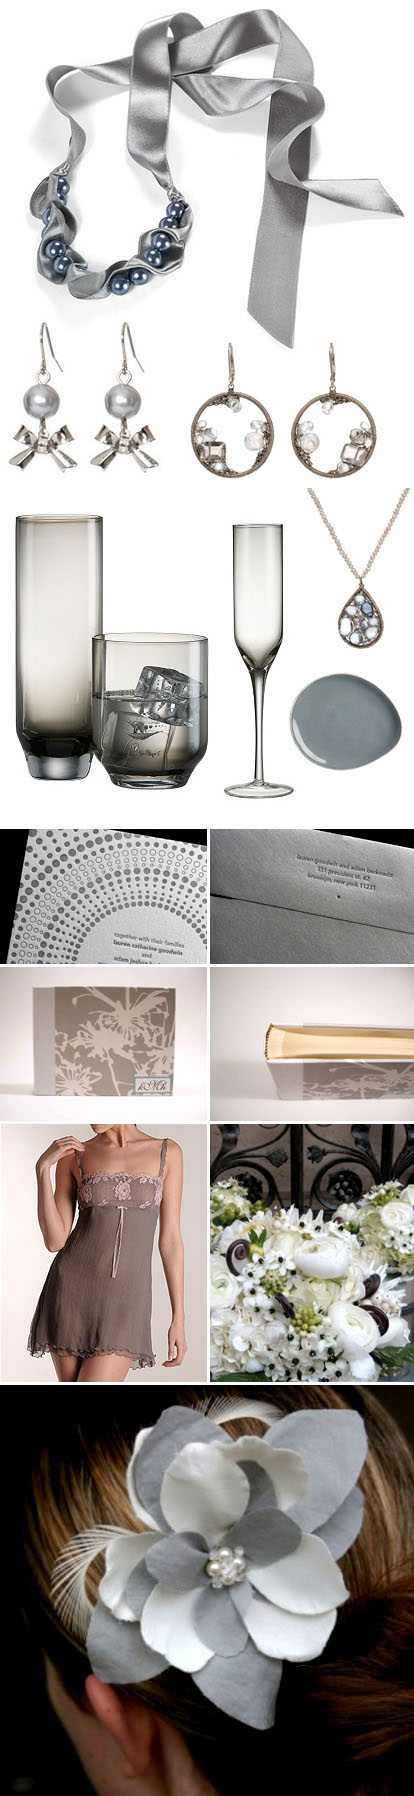 gray wedding decor and accessories